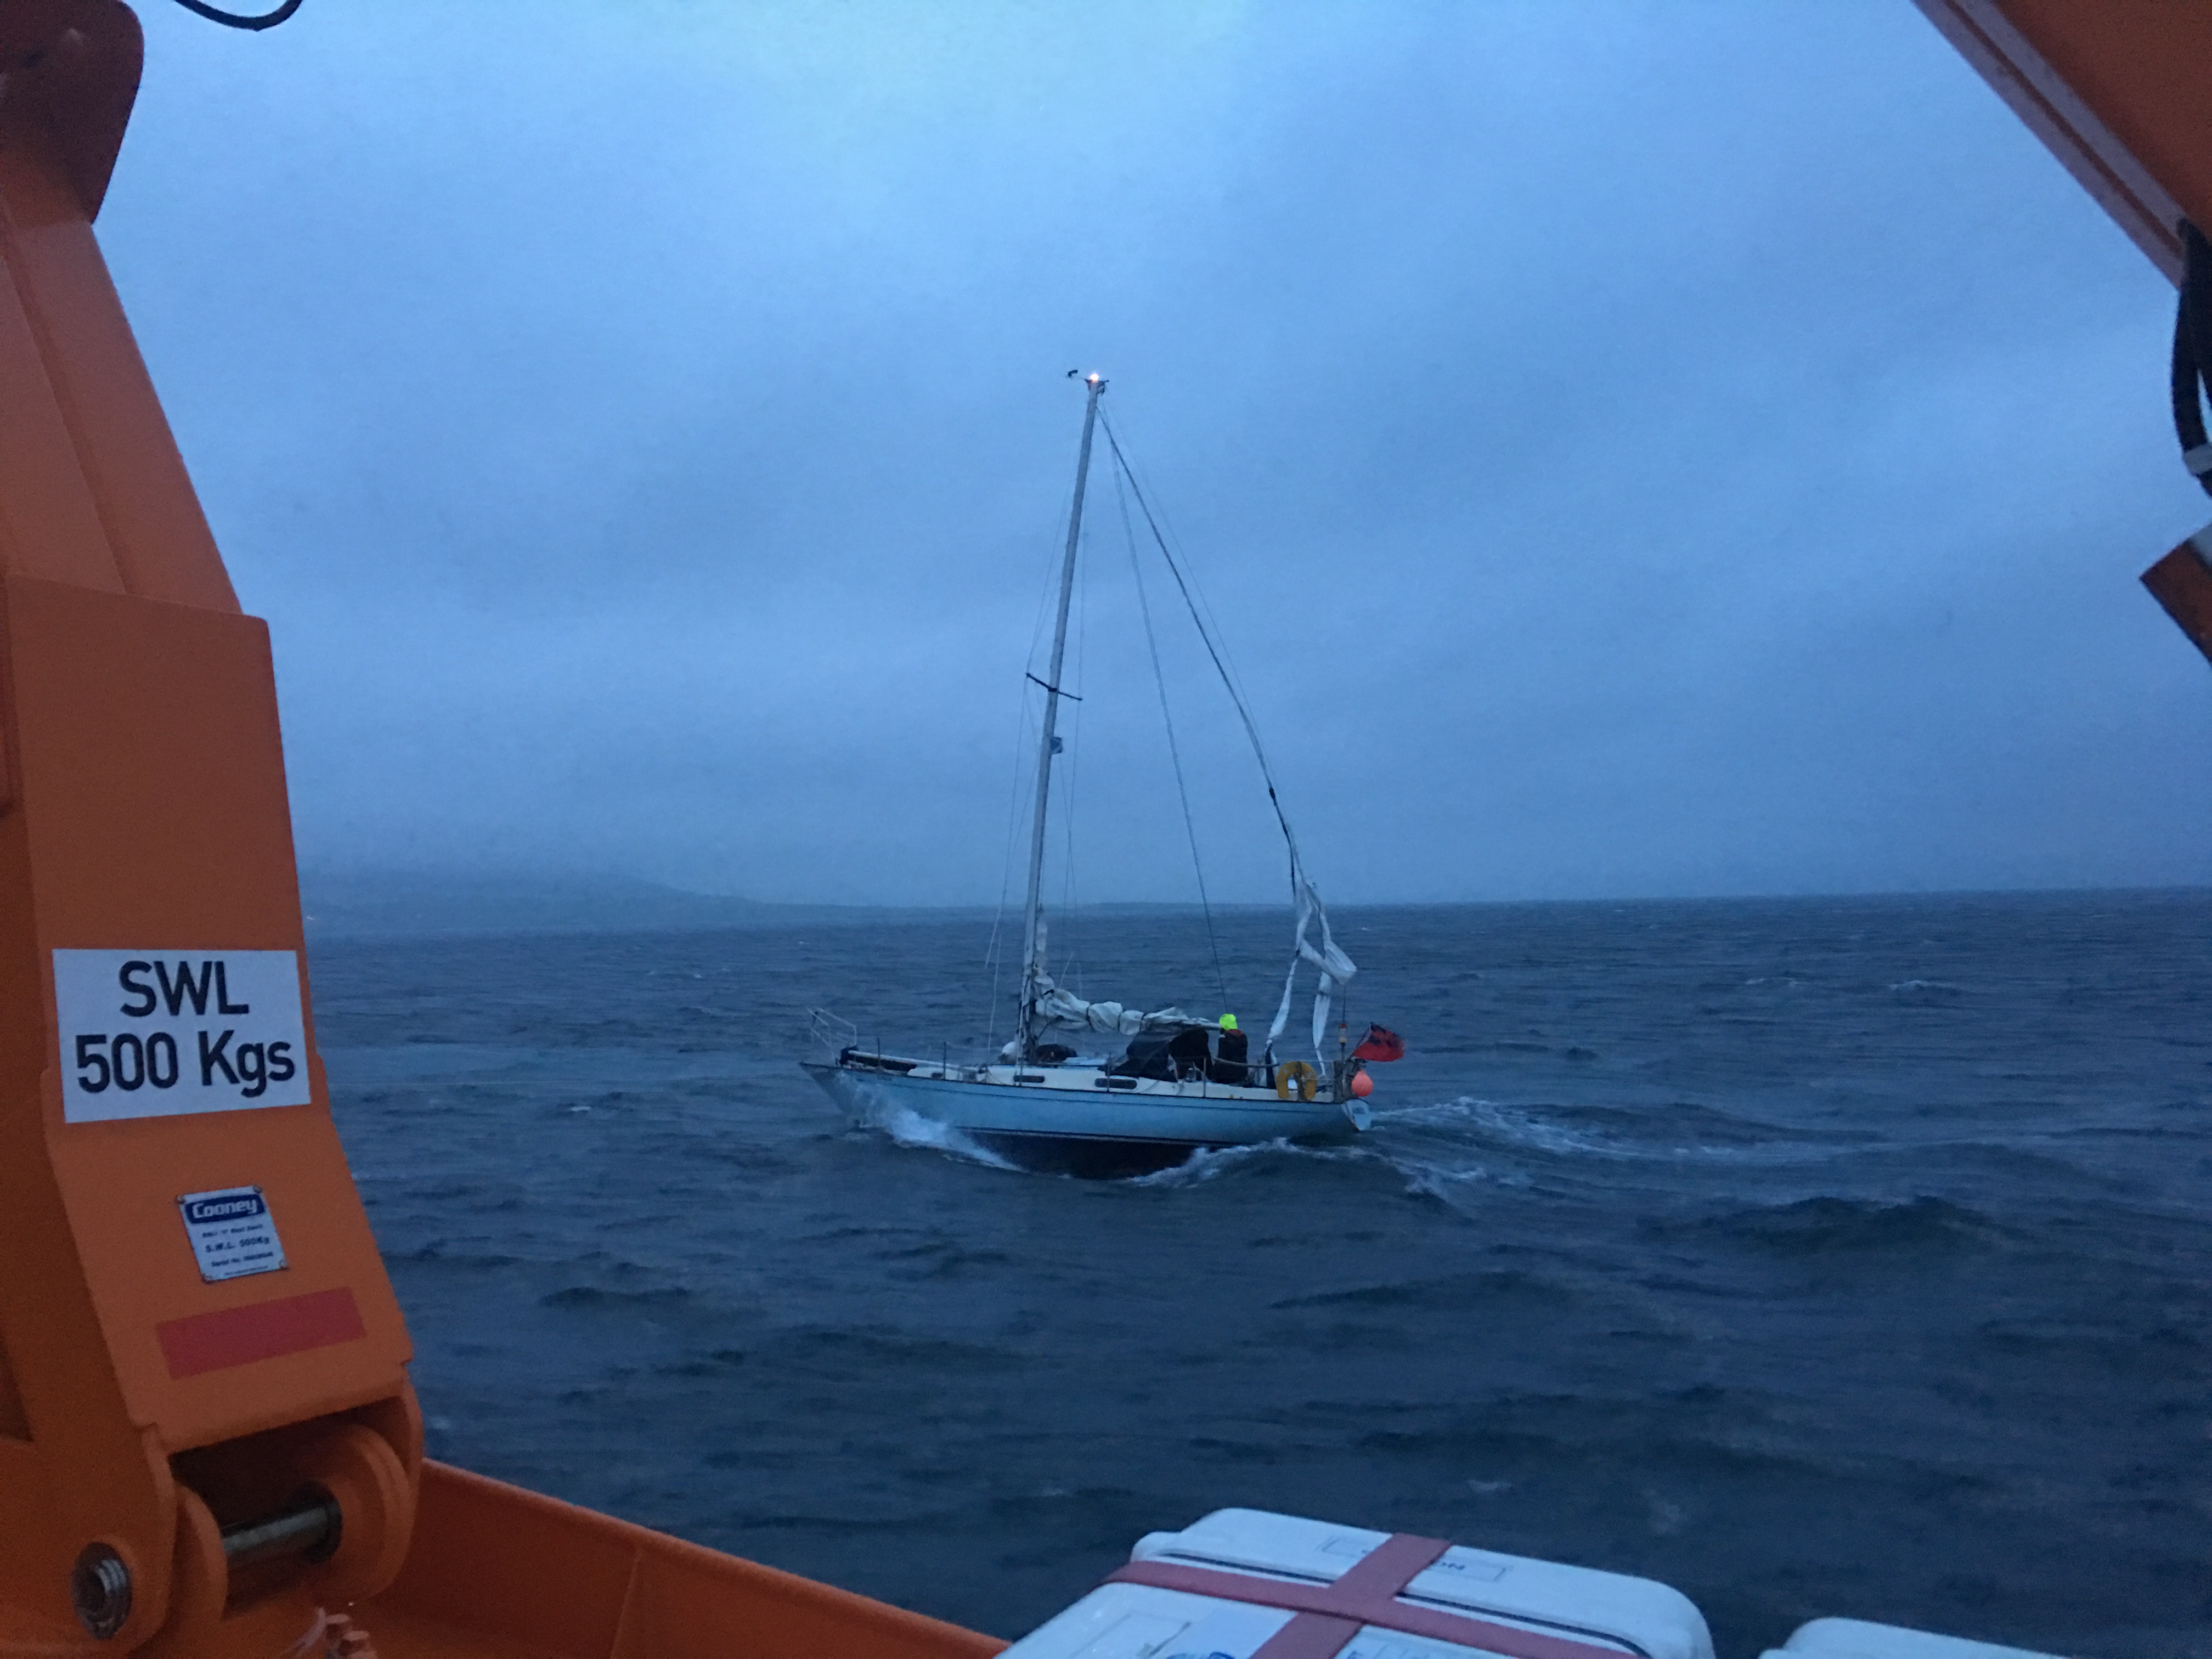 The sailing yacht came into trouble near Stronsay